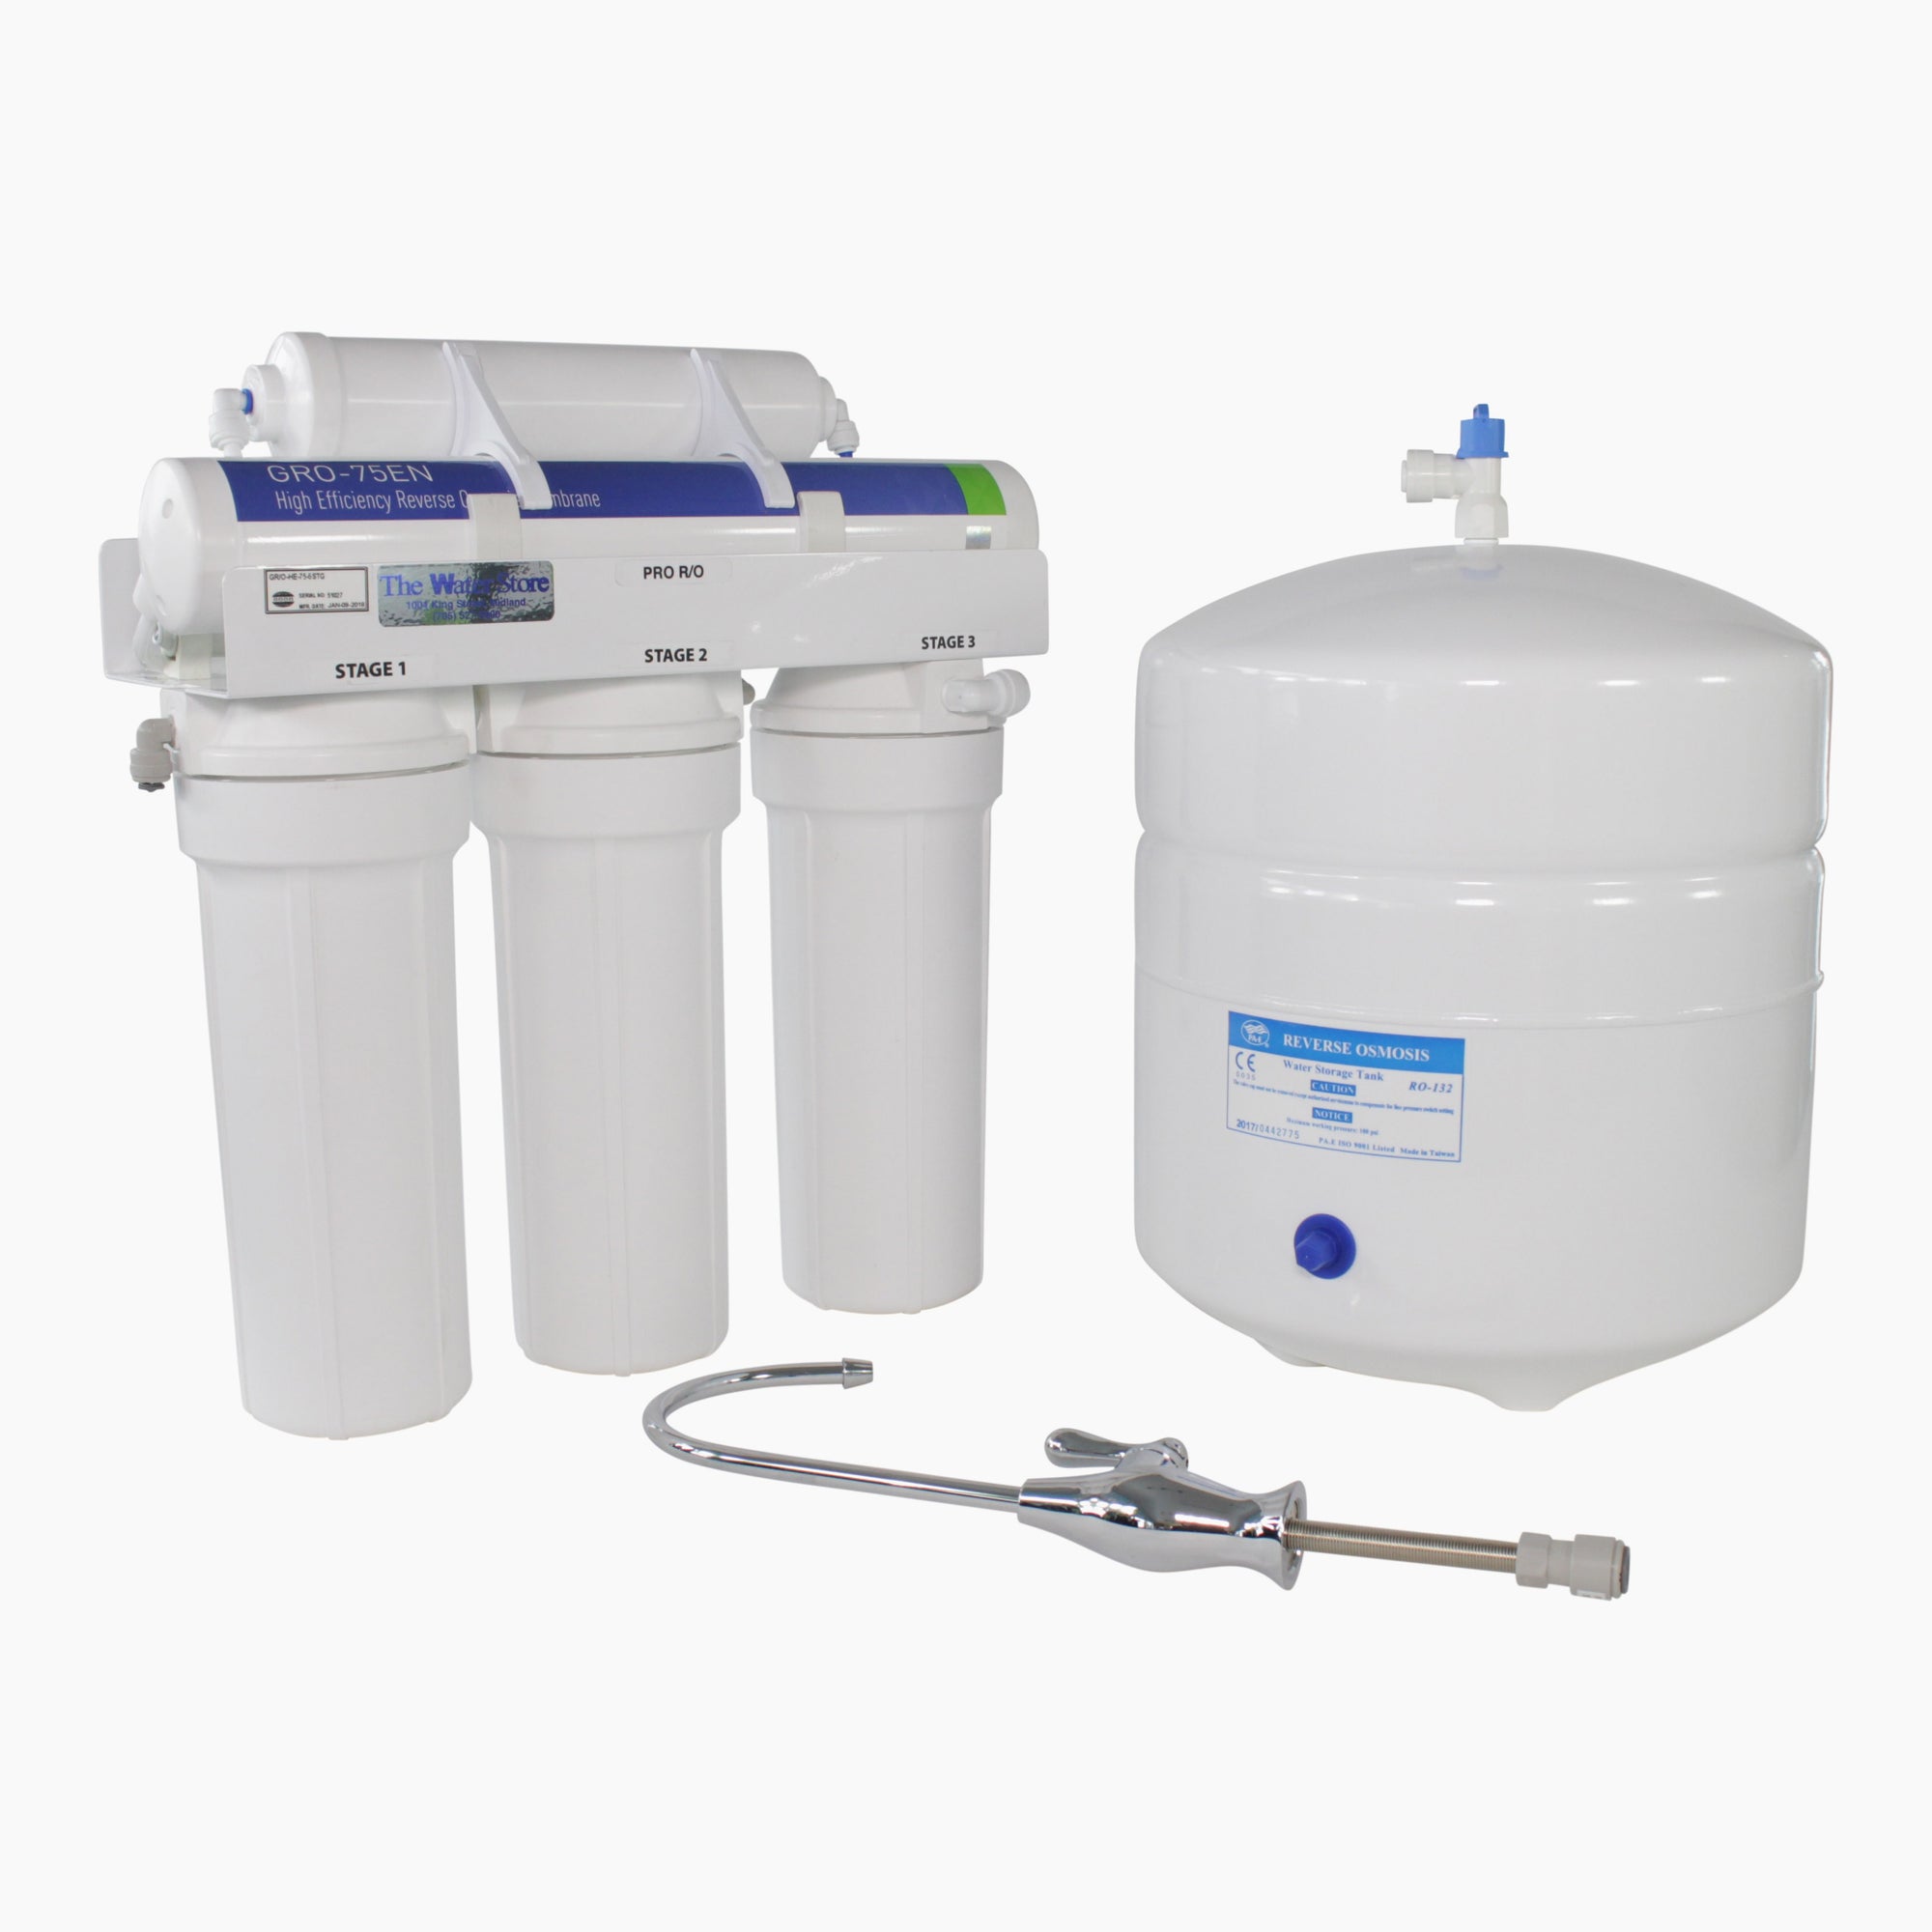 Water Saver 75 High Efficiency Reverse Osmosis Drinking Water System Review